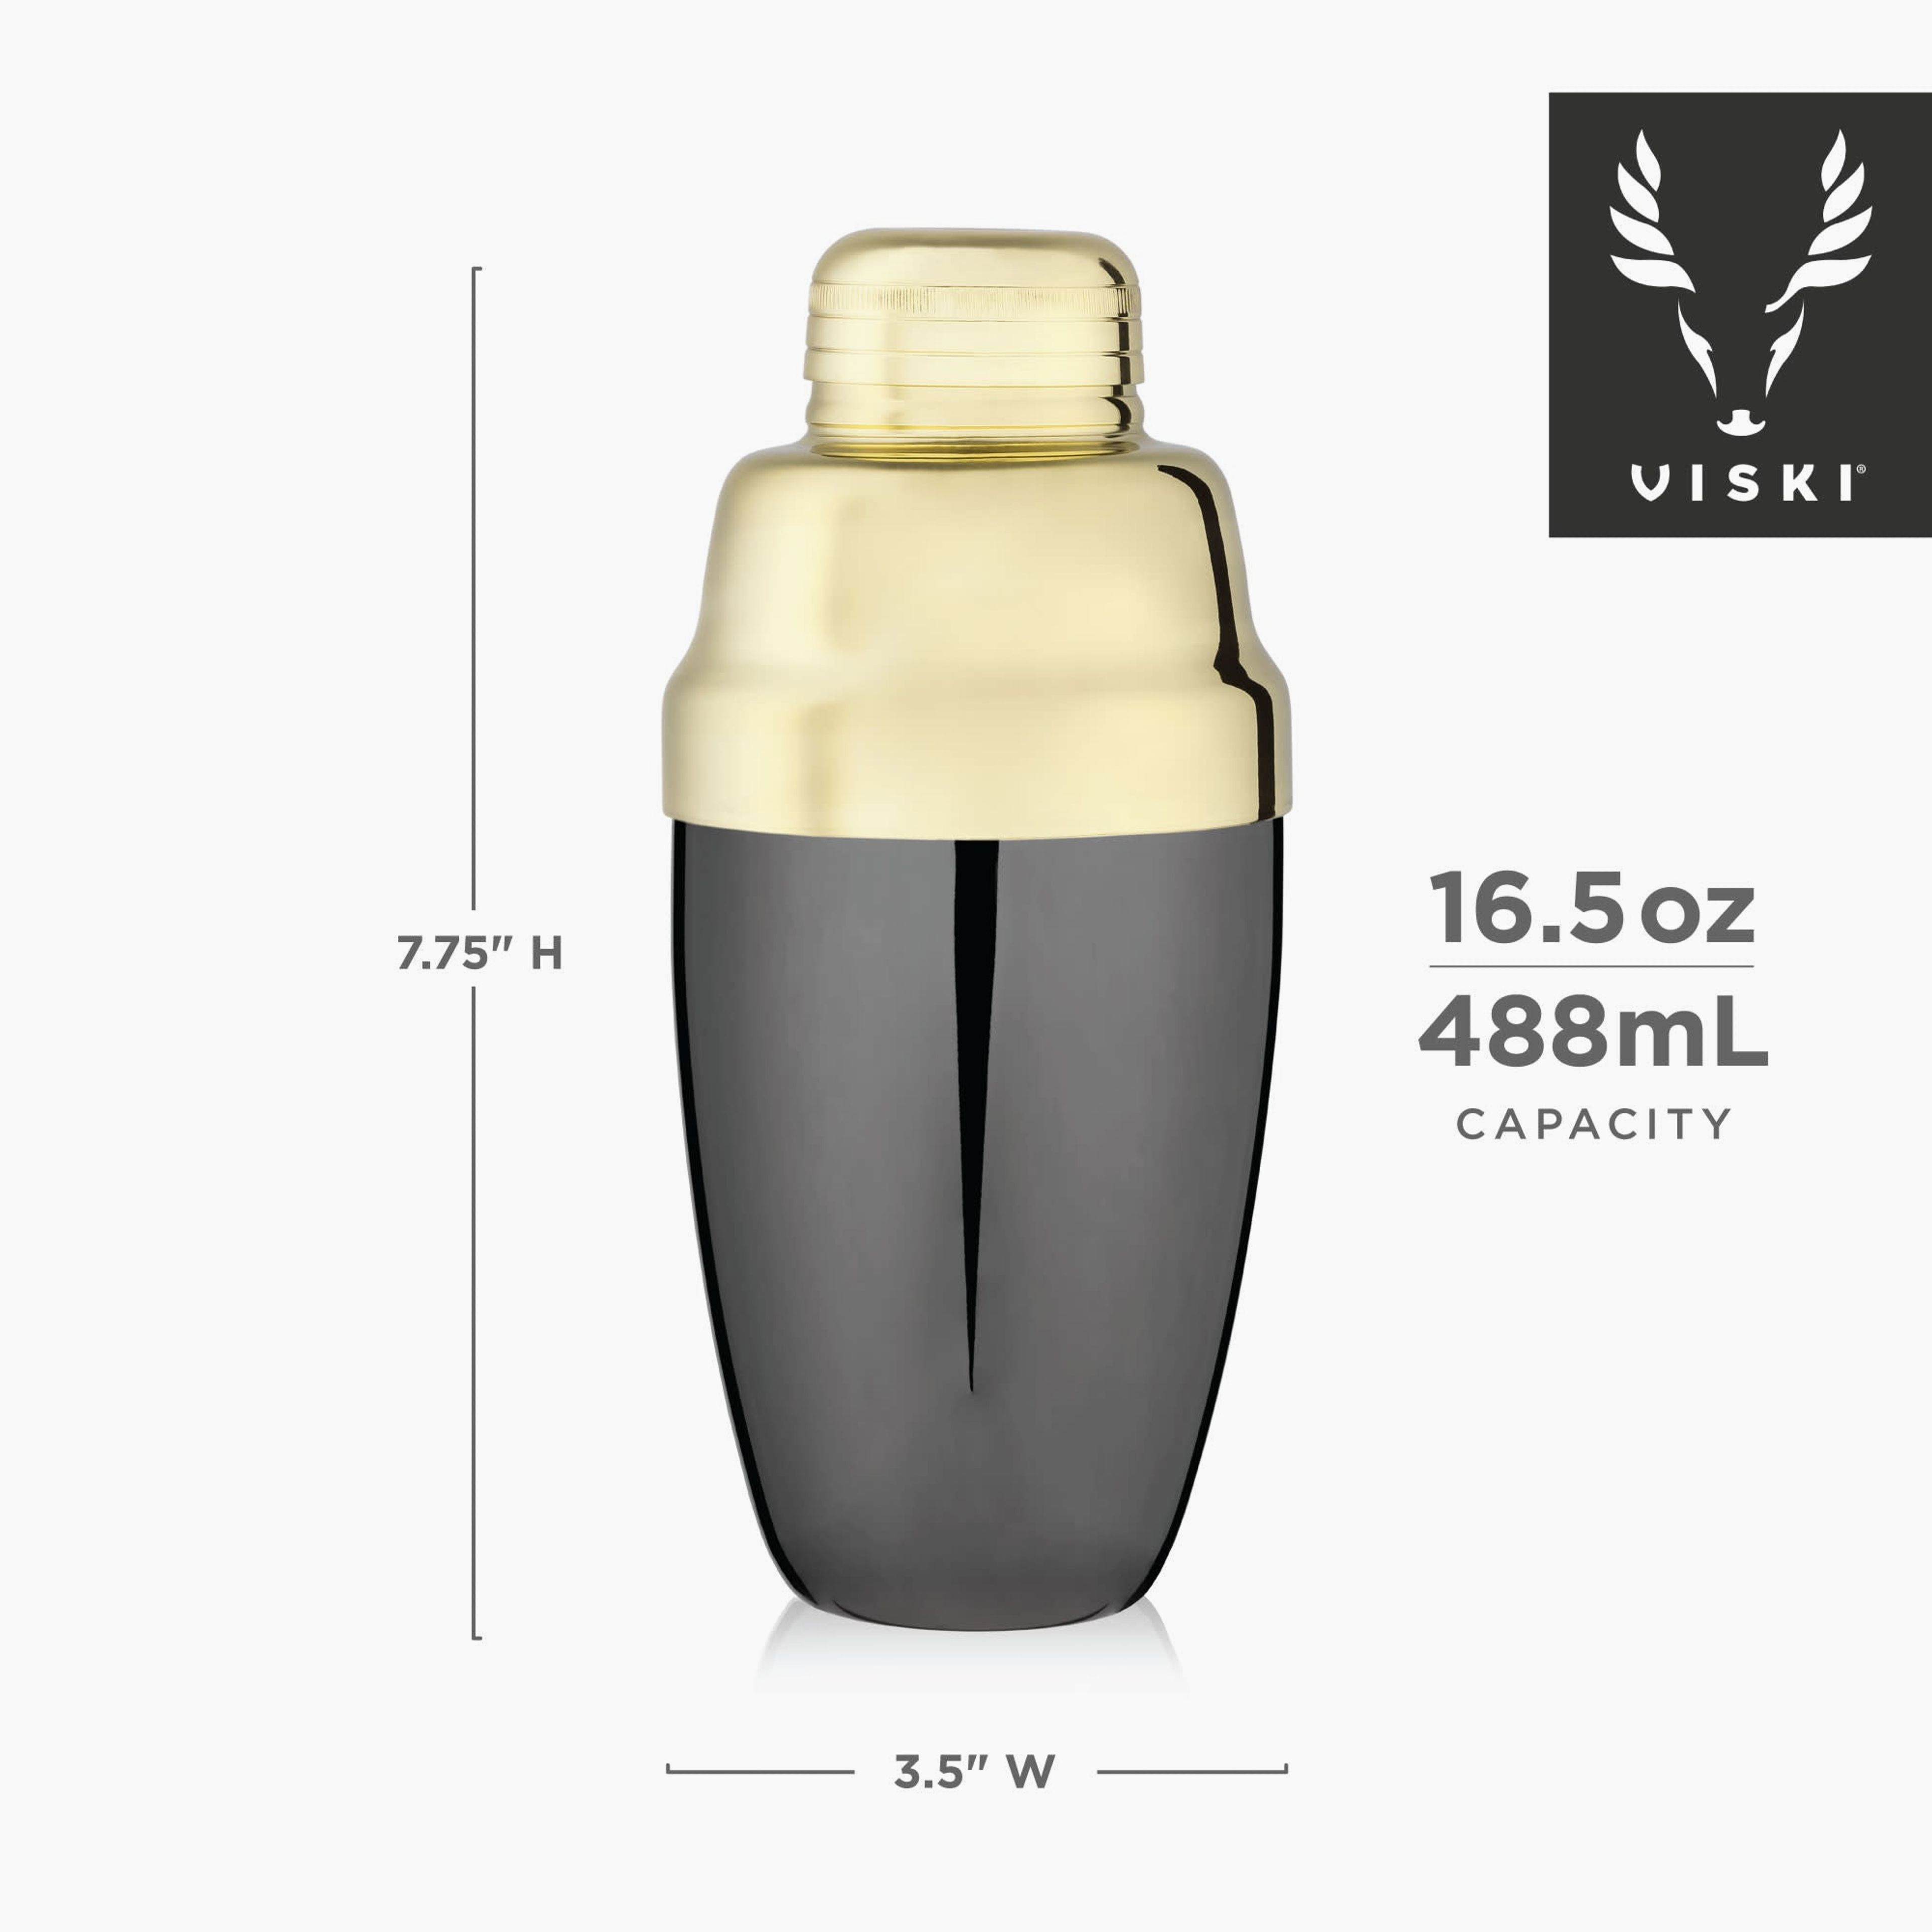 Two-Toned Heavyweight Cocktail Shaker by Viski